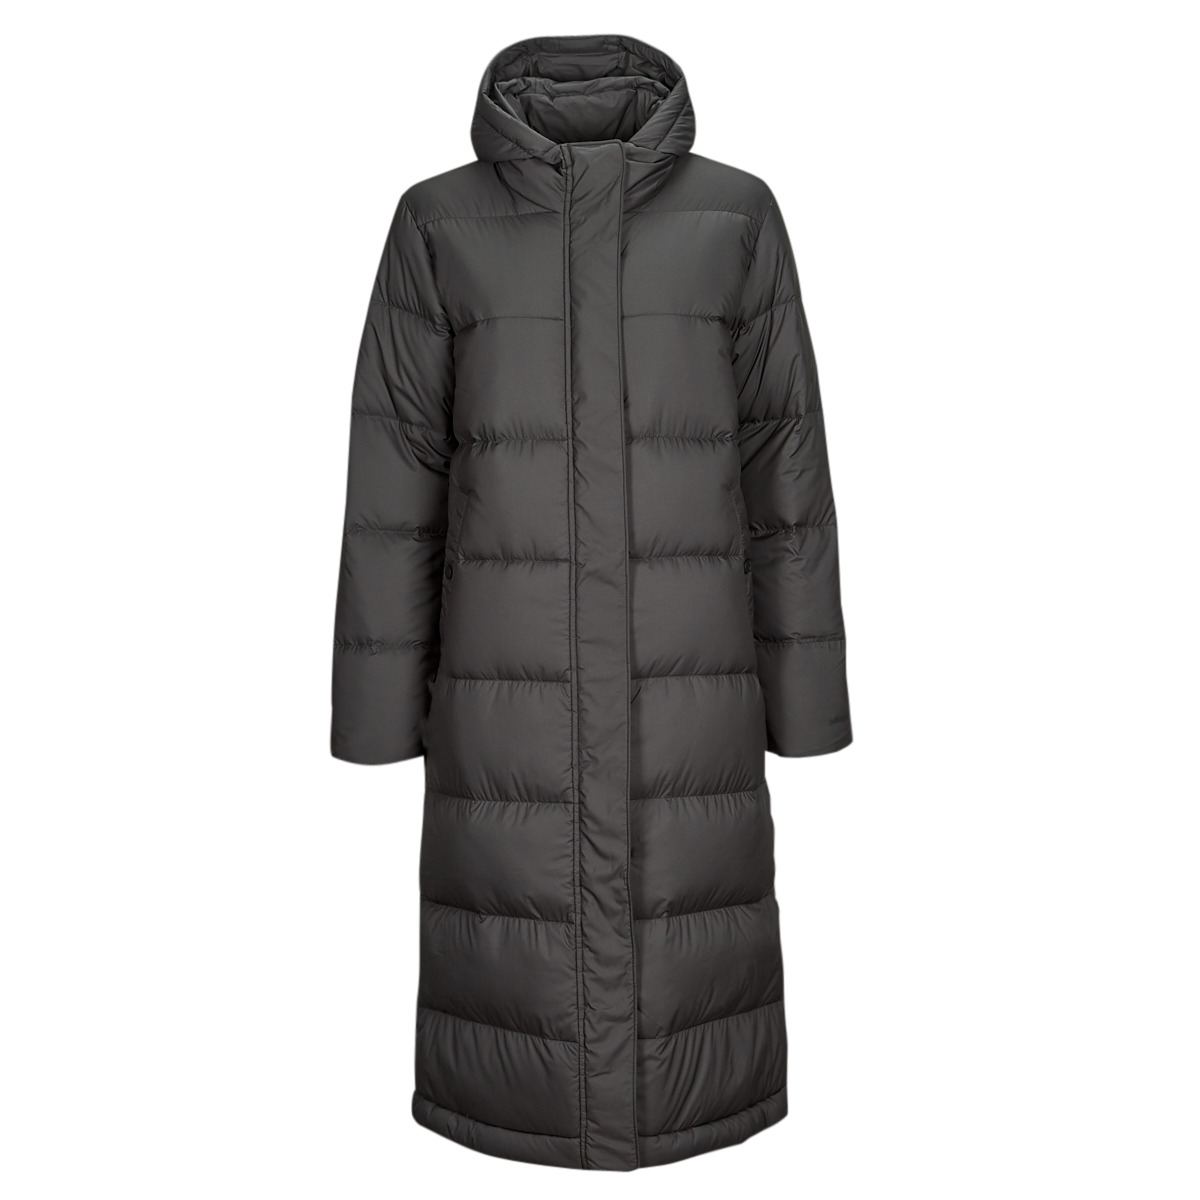 patagonia  w's silent down long parka  women's jacket in black